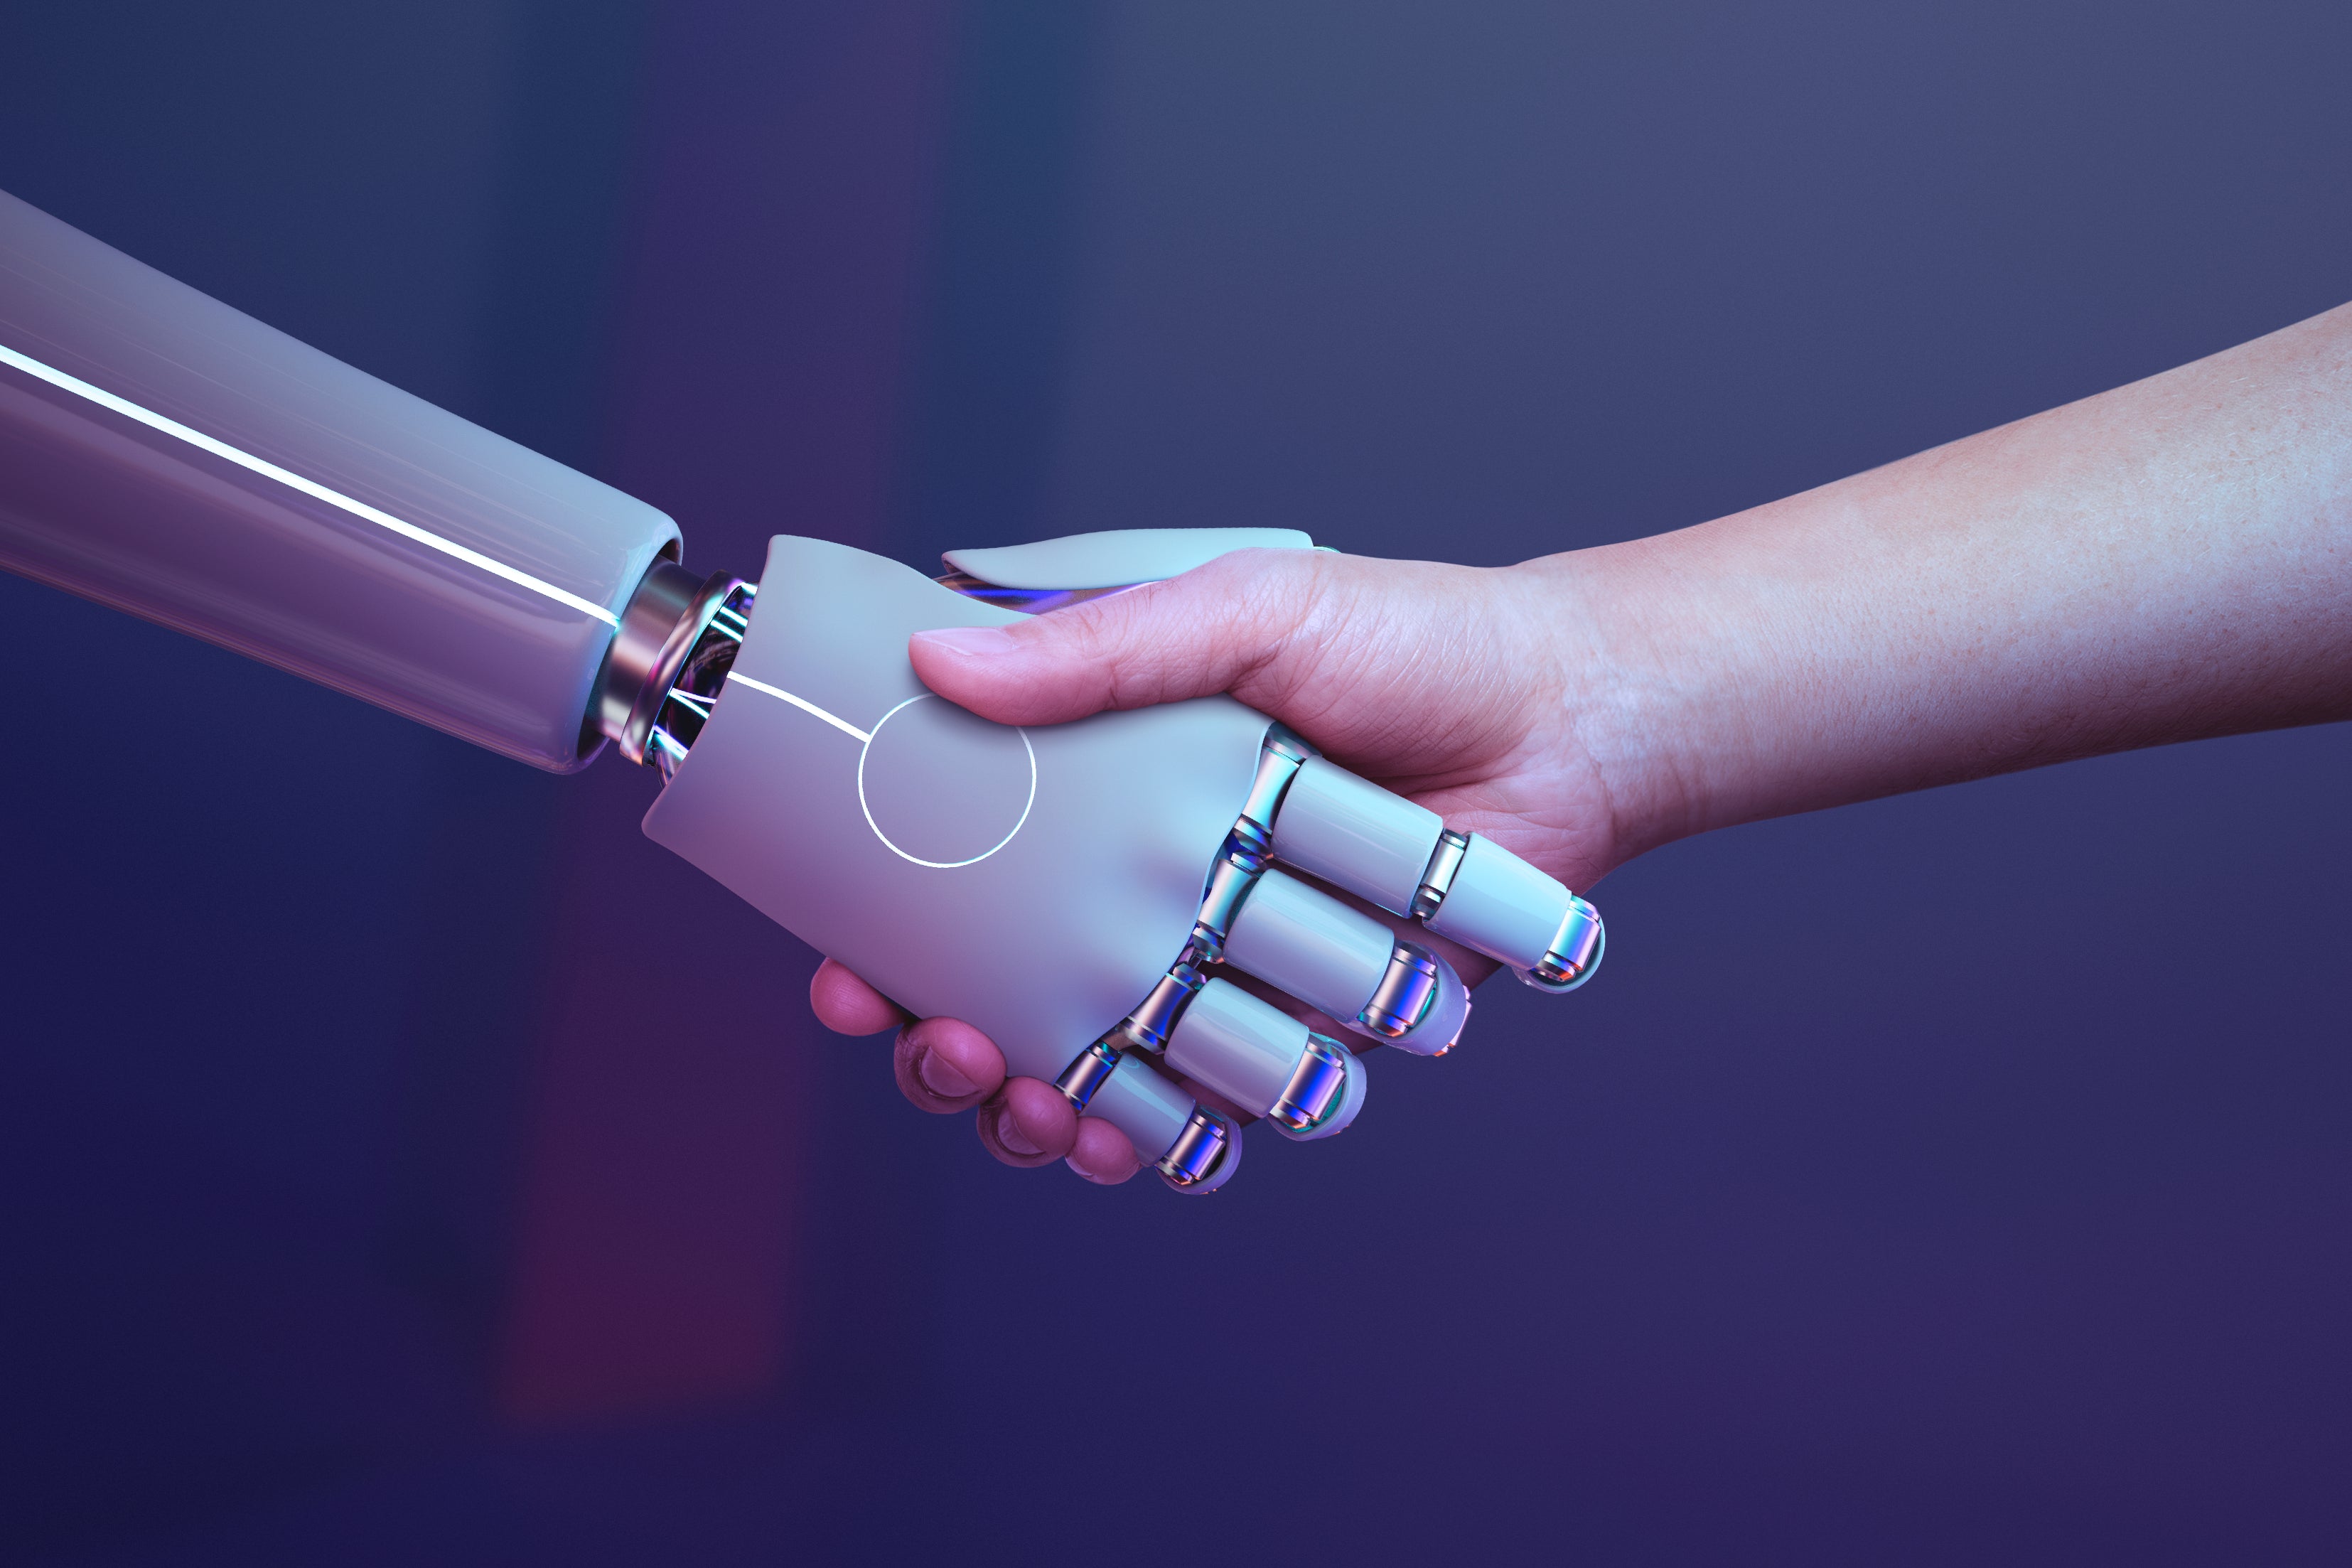 Ai hand in hand with humans